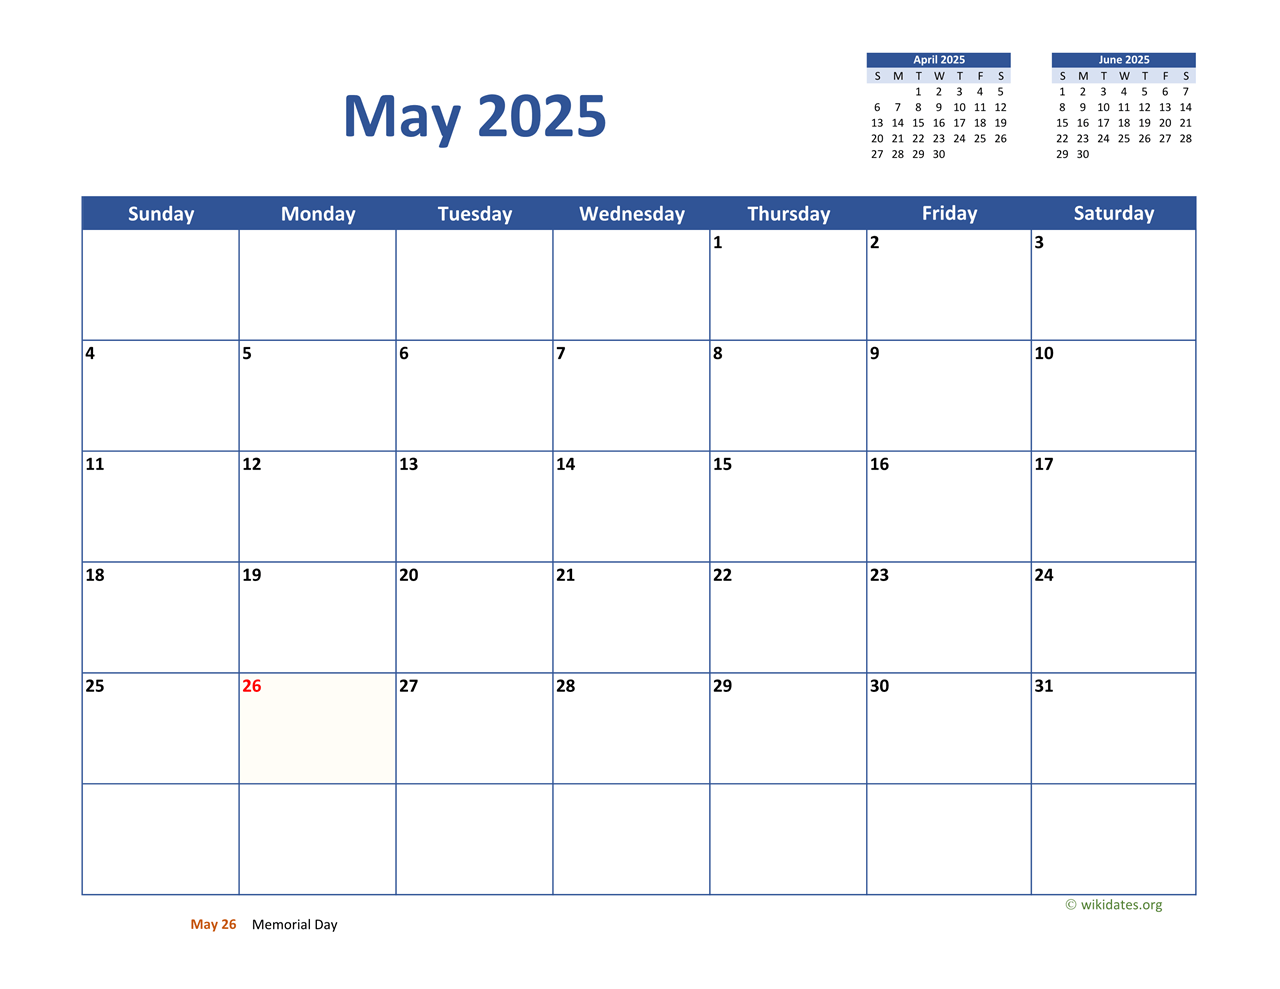 april-2025-calendar-templates-for-word-excel-and-pdf